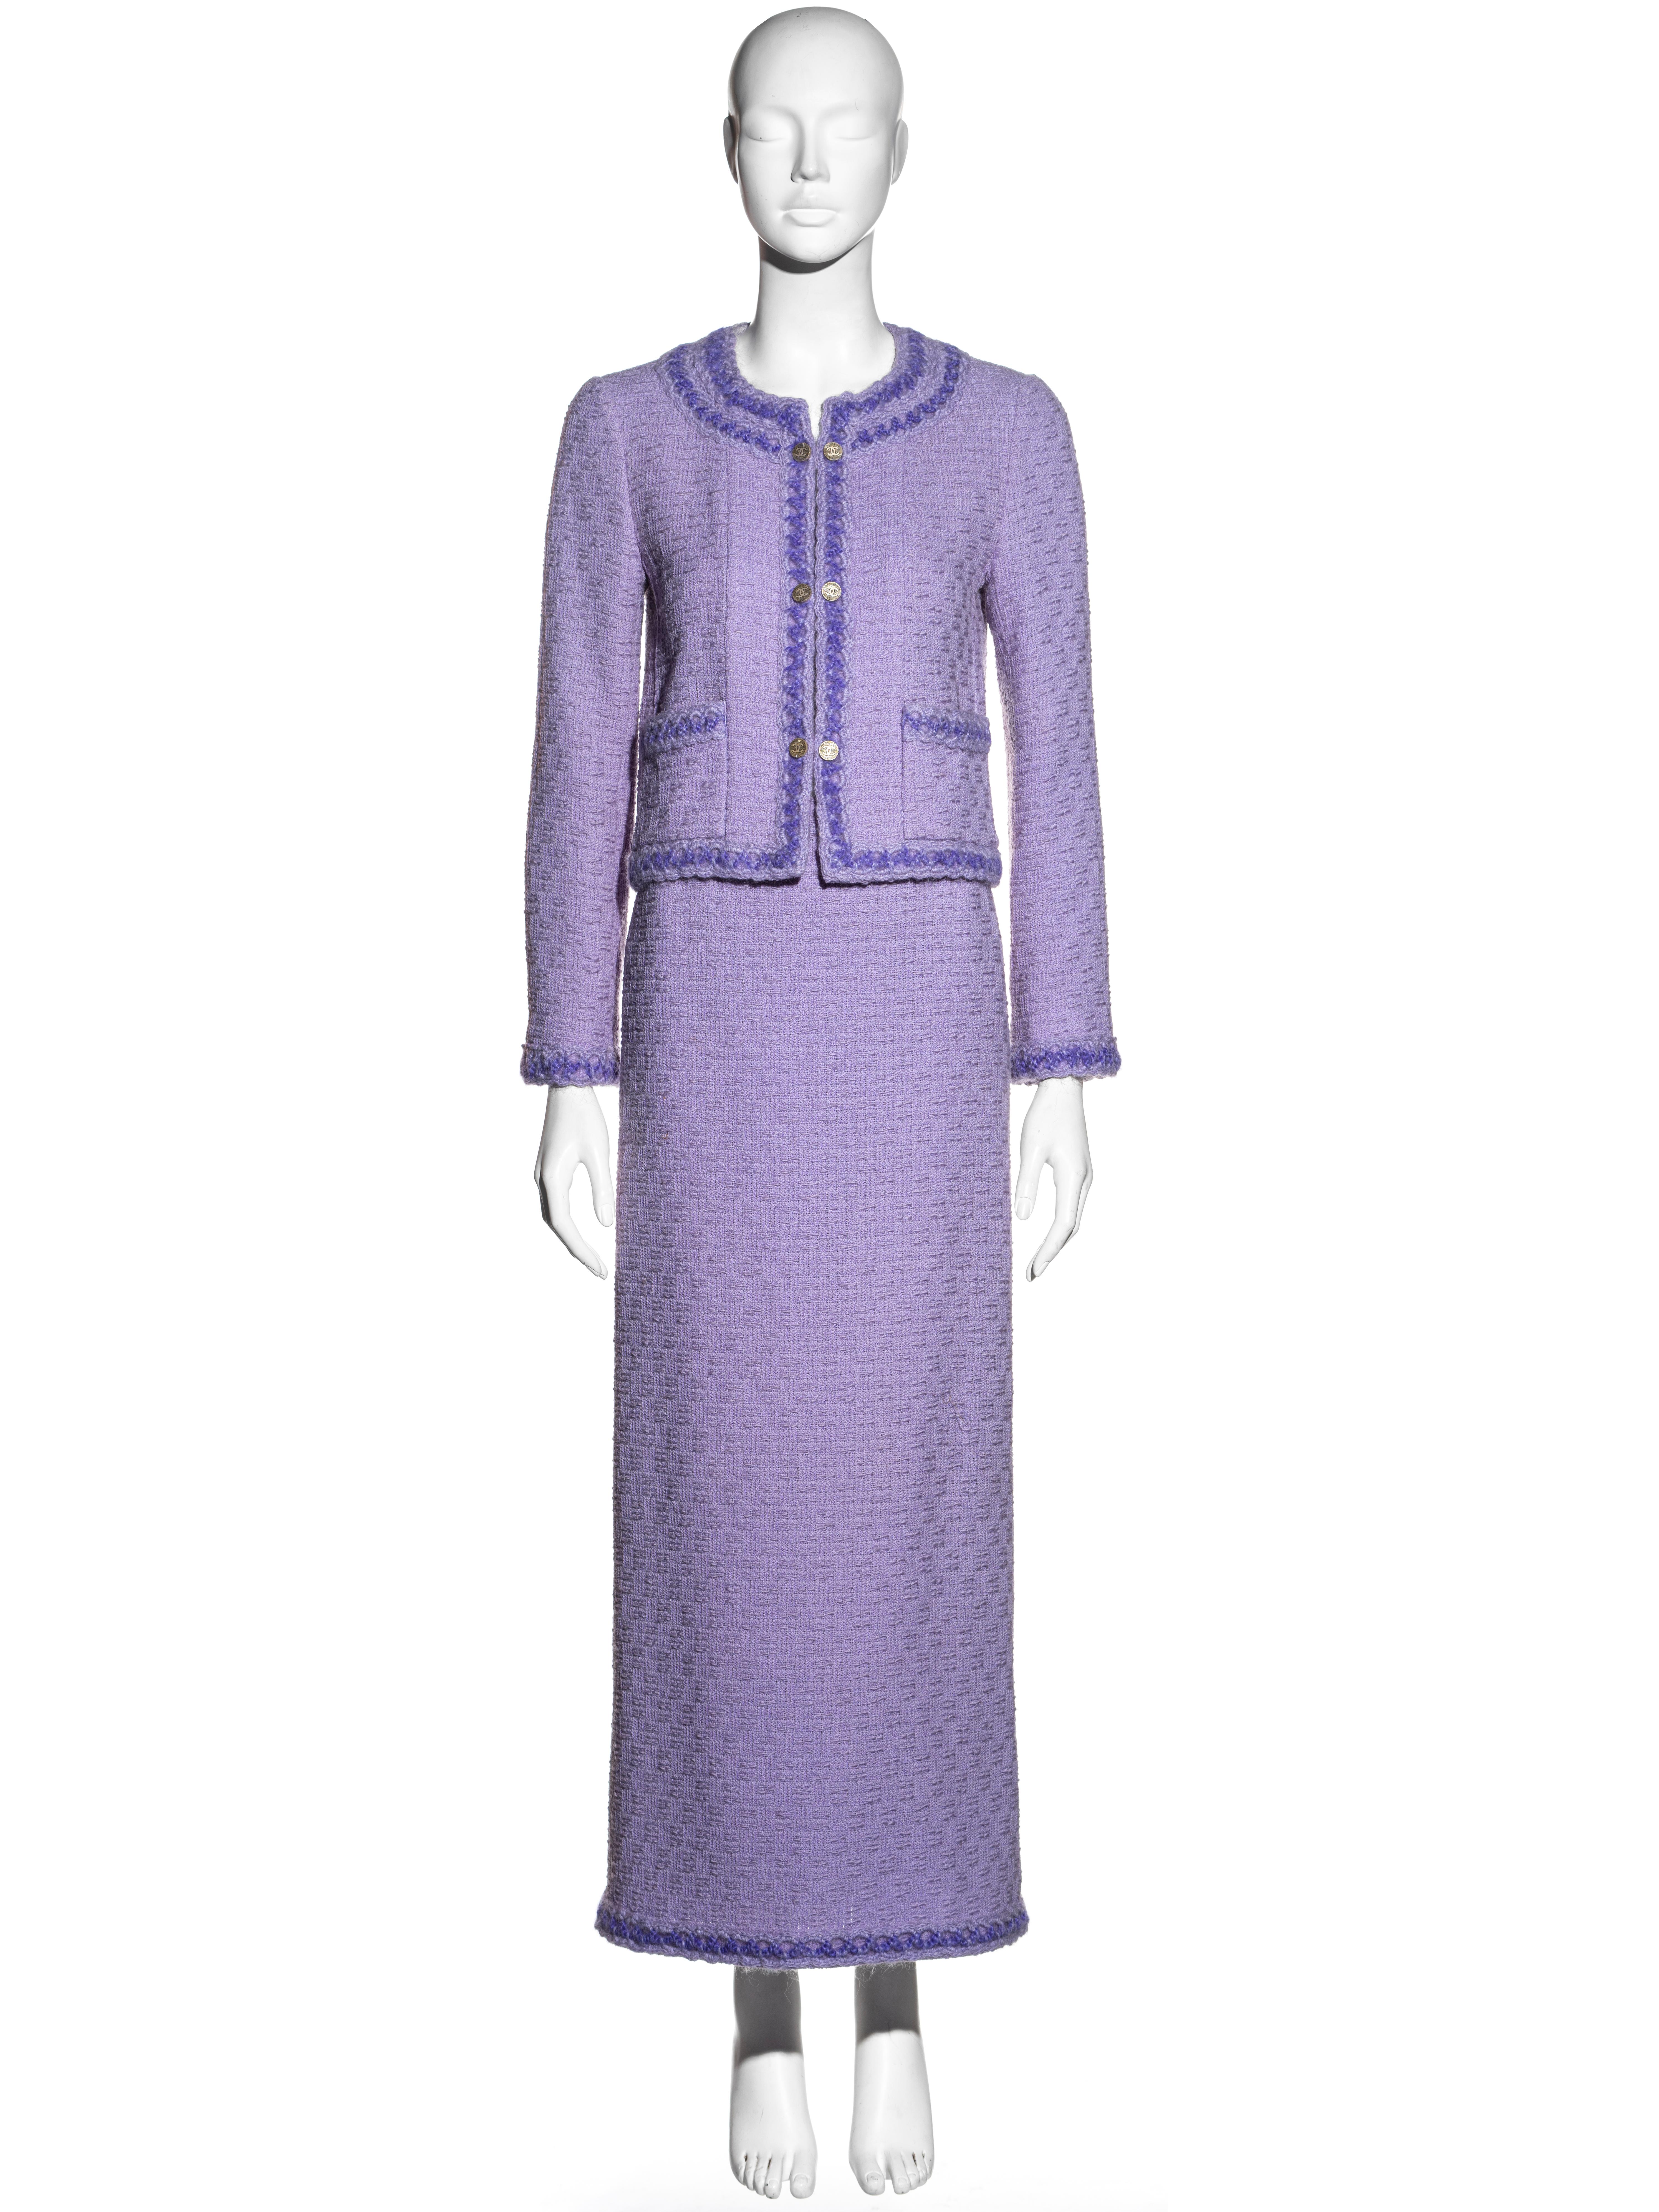 ▪ Chanel lilac tweed skirt suit
▪ Designed by Karl Lagerfeld
▪ Cardigan jacket with dark lilac embroidered lattice trim
▪ 'CC' engraved silver metal cufflink buttons 
▪ Maxi skirt with draped detail to the back 
▪ Silk lining
▪ FR 36 - UK 8
▪